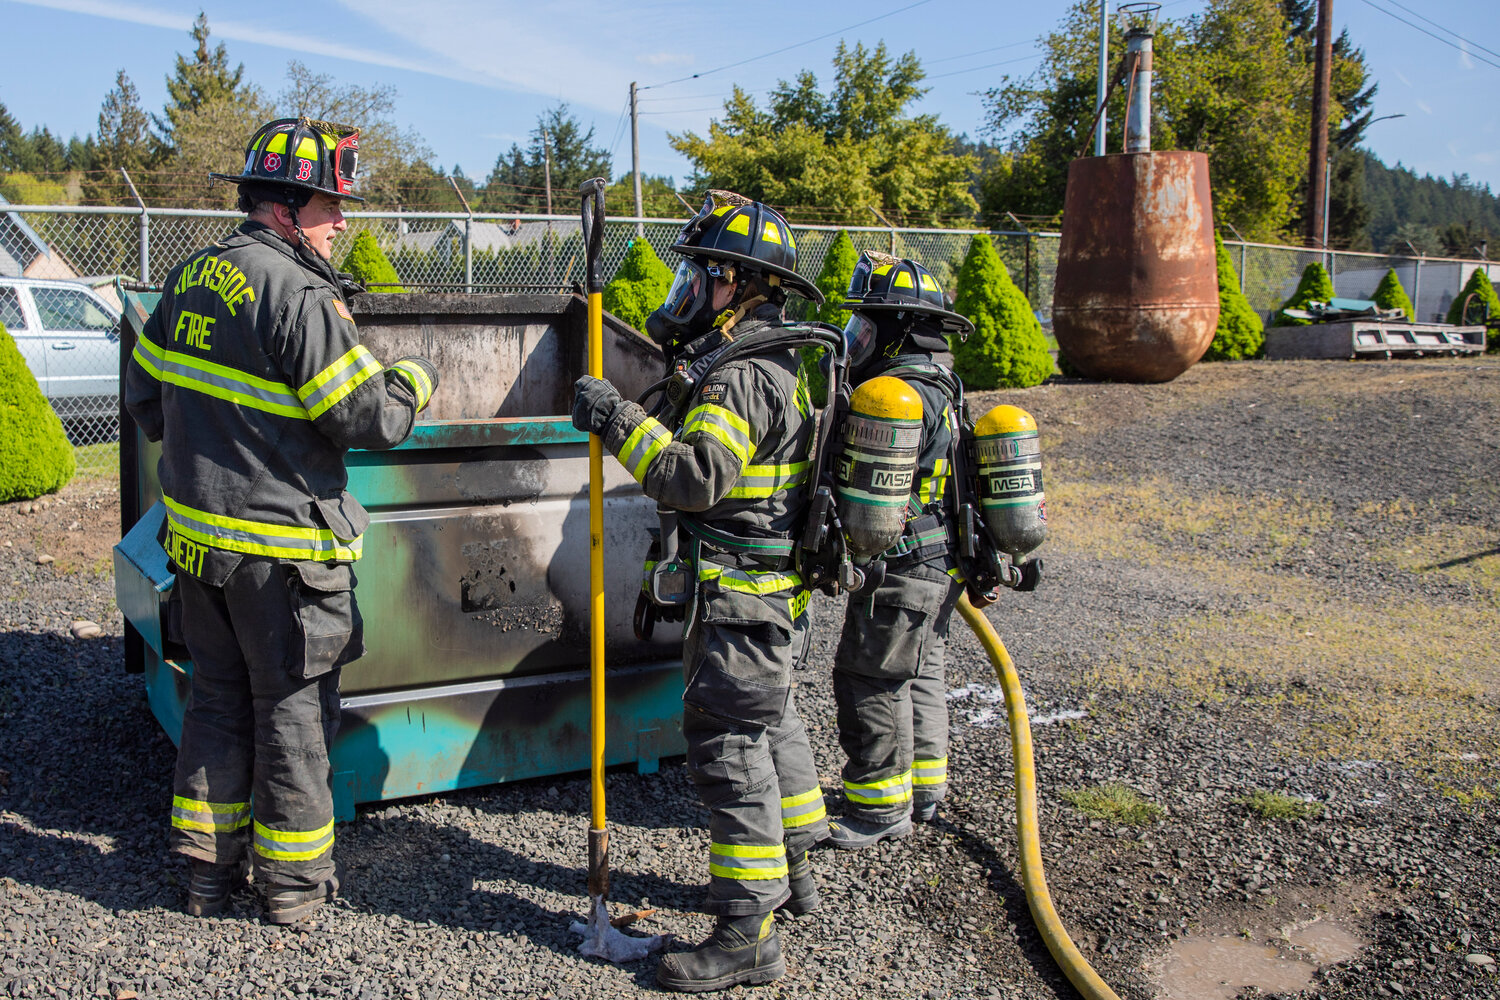 Riverside Fire Authority responds to a dumpster fire along North Gold Street in Centralia on Thursday, May 11.